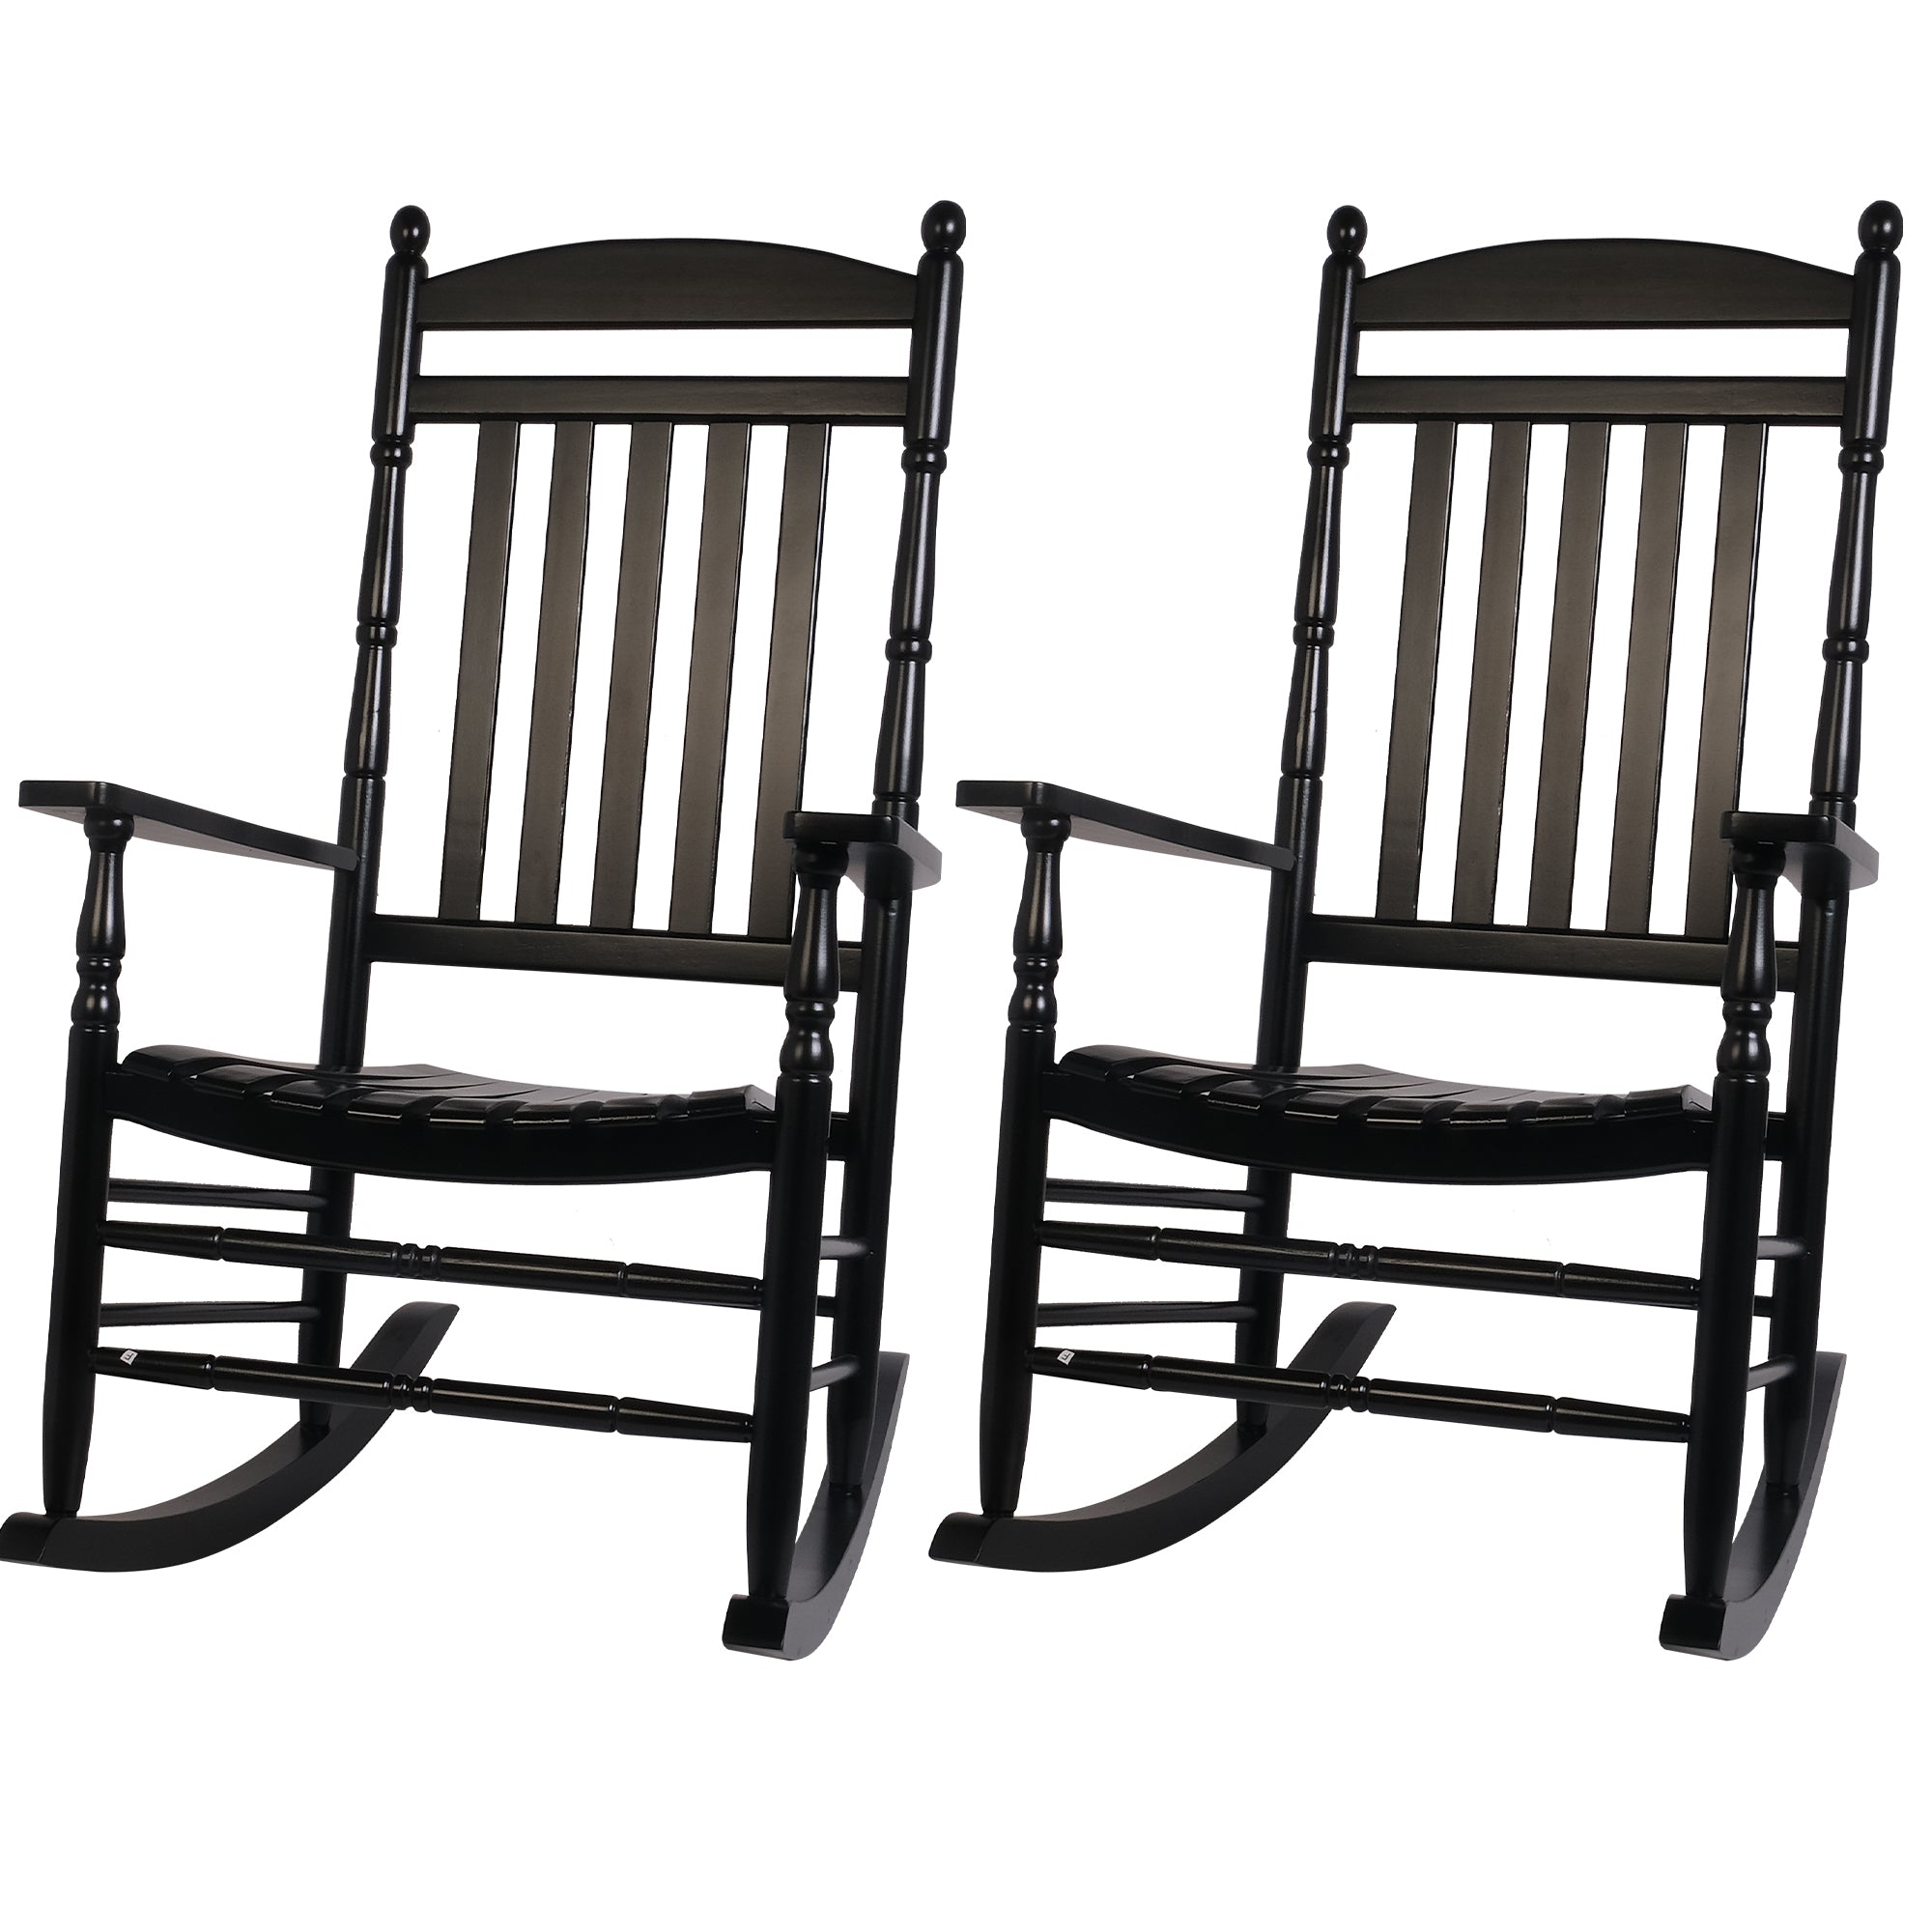 Set of 2 Outdoor Rocking Chairs Wooden High Back Rocker with Armrest for Garden Patio, Black